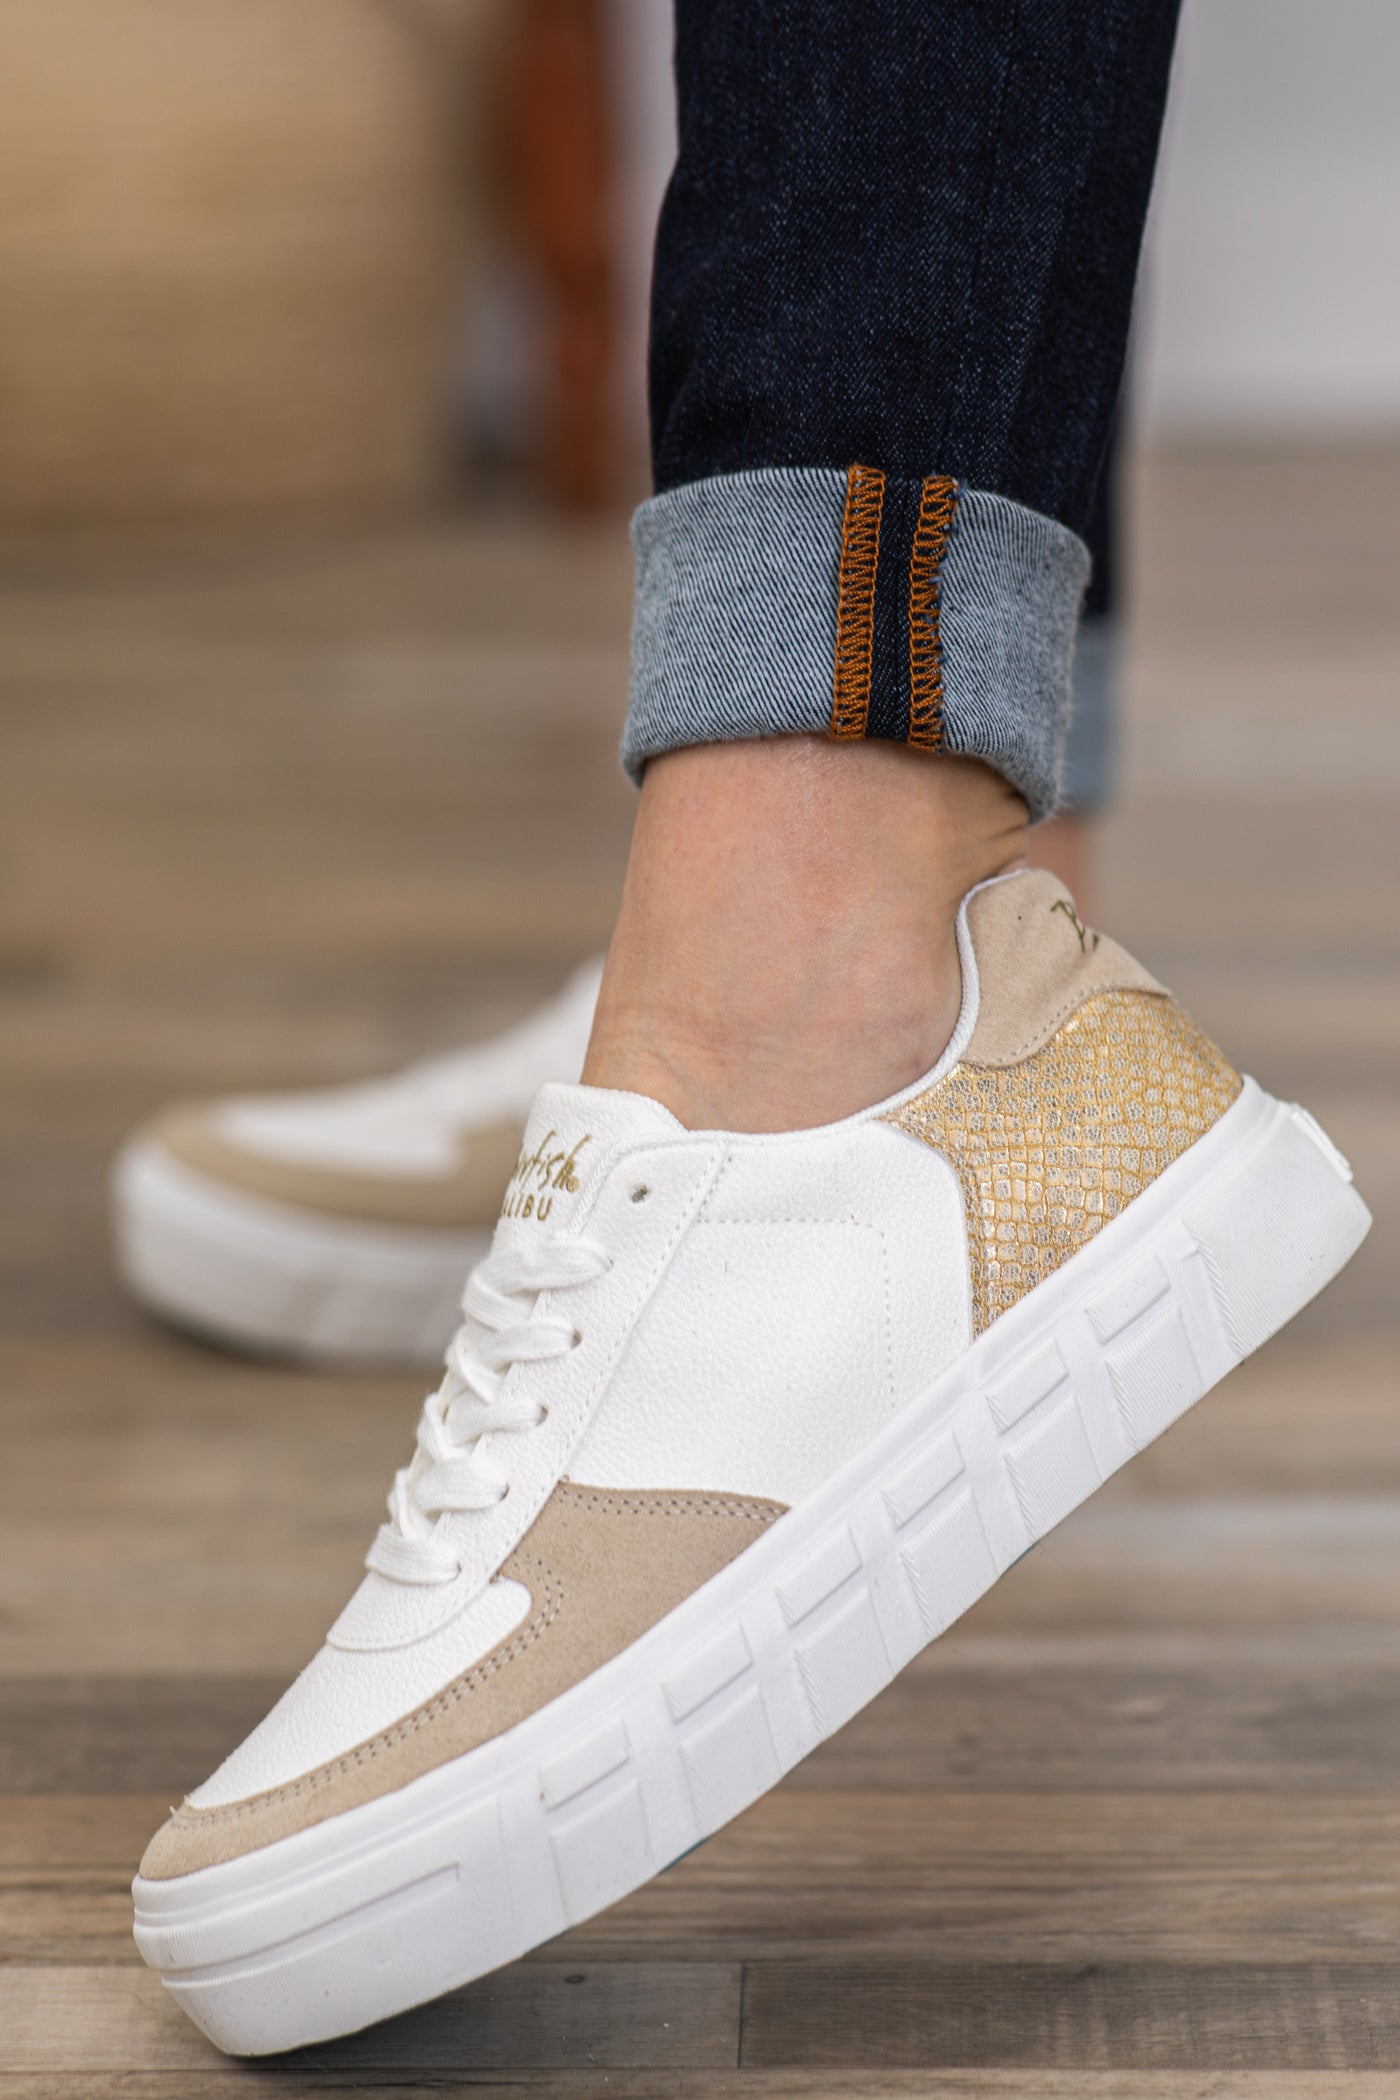 White and Tan Colorblock Platform Sneakers